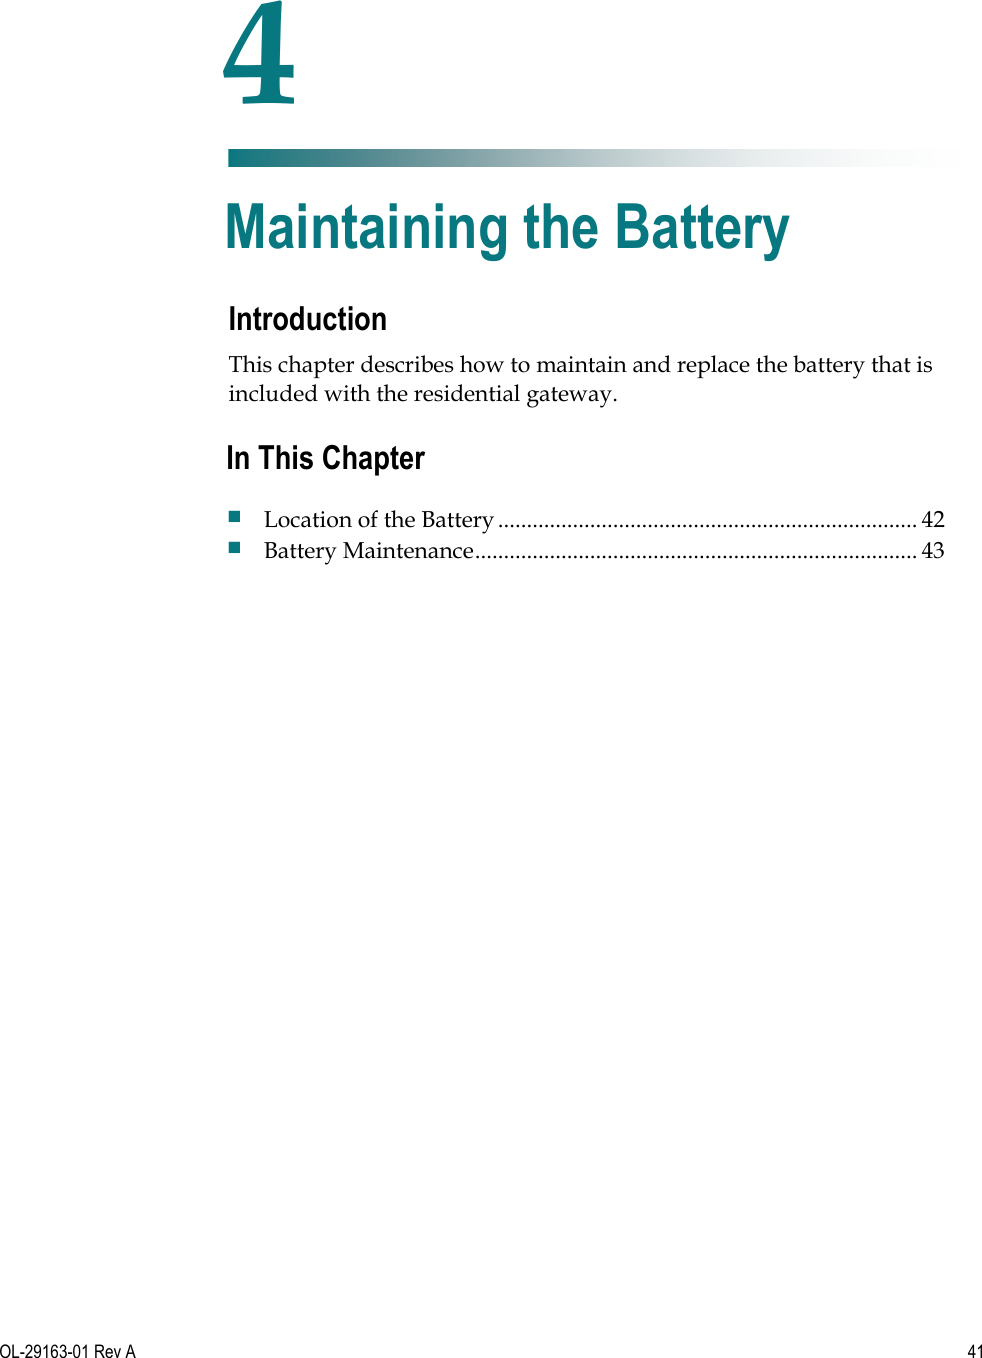   OL-29163-01 Rev A  41  Introduction This chapter describes how to maintain and replace the battery that is included with the residential gateway.     4 Chapter 4 Maintaining the Battery In This Chapter  Location of the Battery ......................................................................... 42  Battery Maintenance ............................................................................. 43 